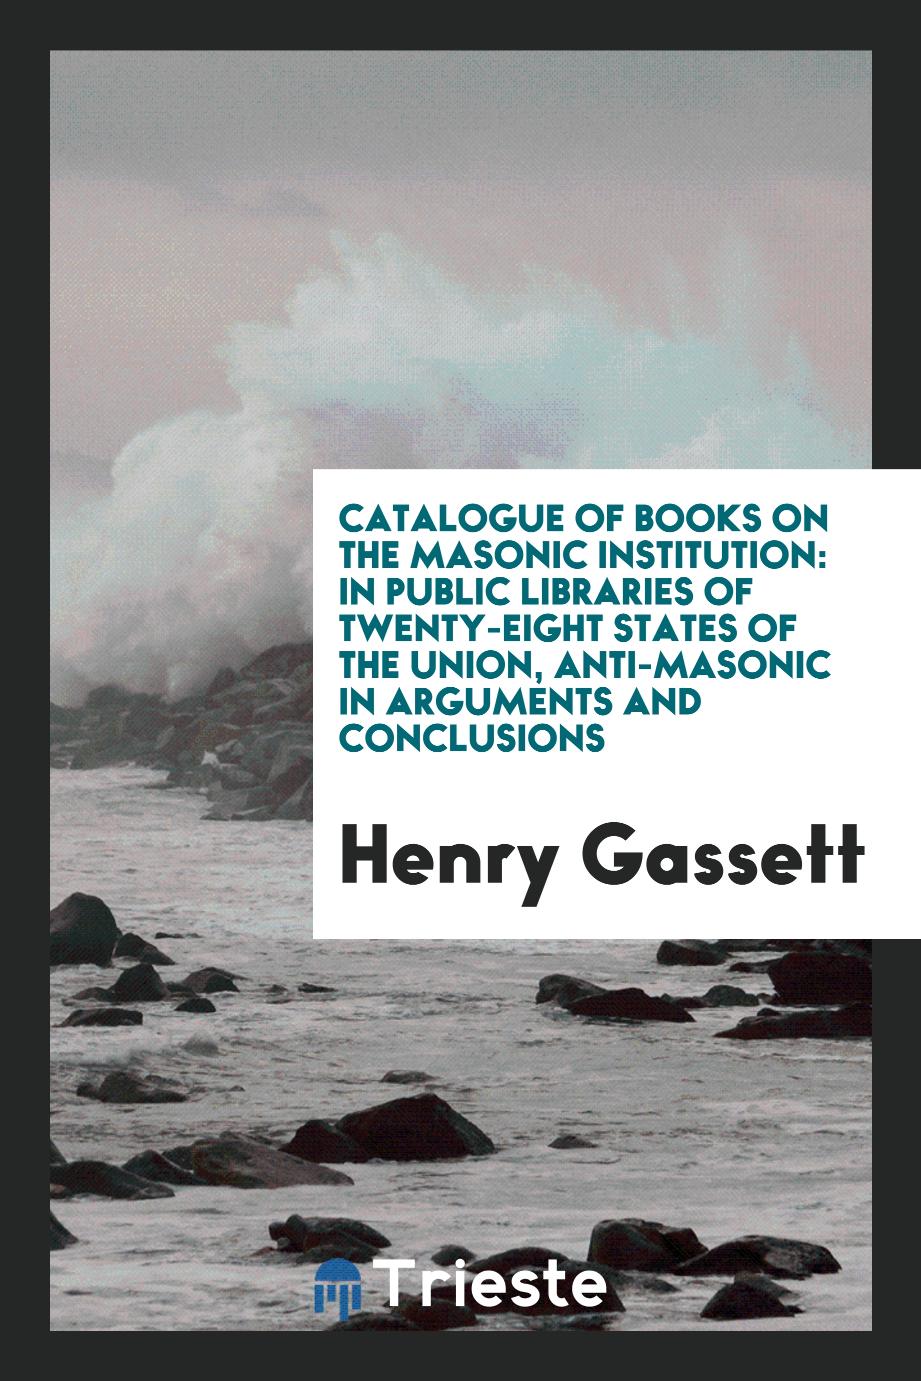 Catalogue of Books on the Masonic Institution: In Public Libraries of Twenty-Eight States of the Union, Anti-Masonic in Arguments and Conclusions